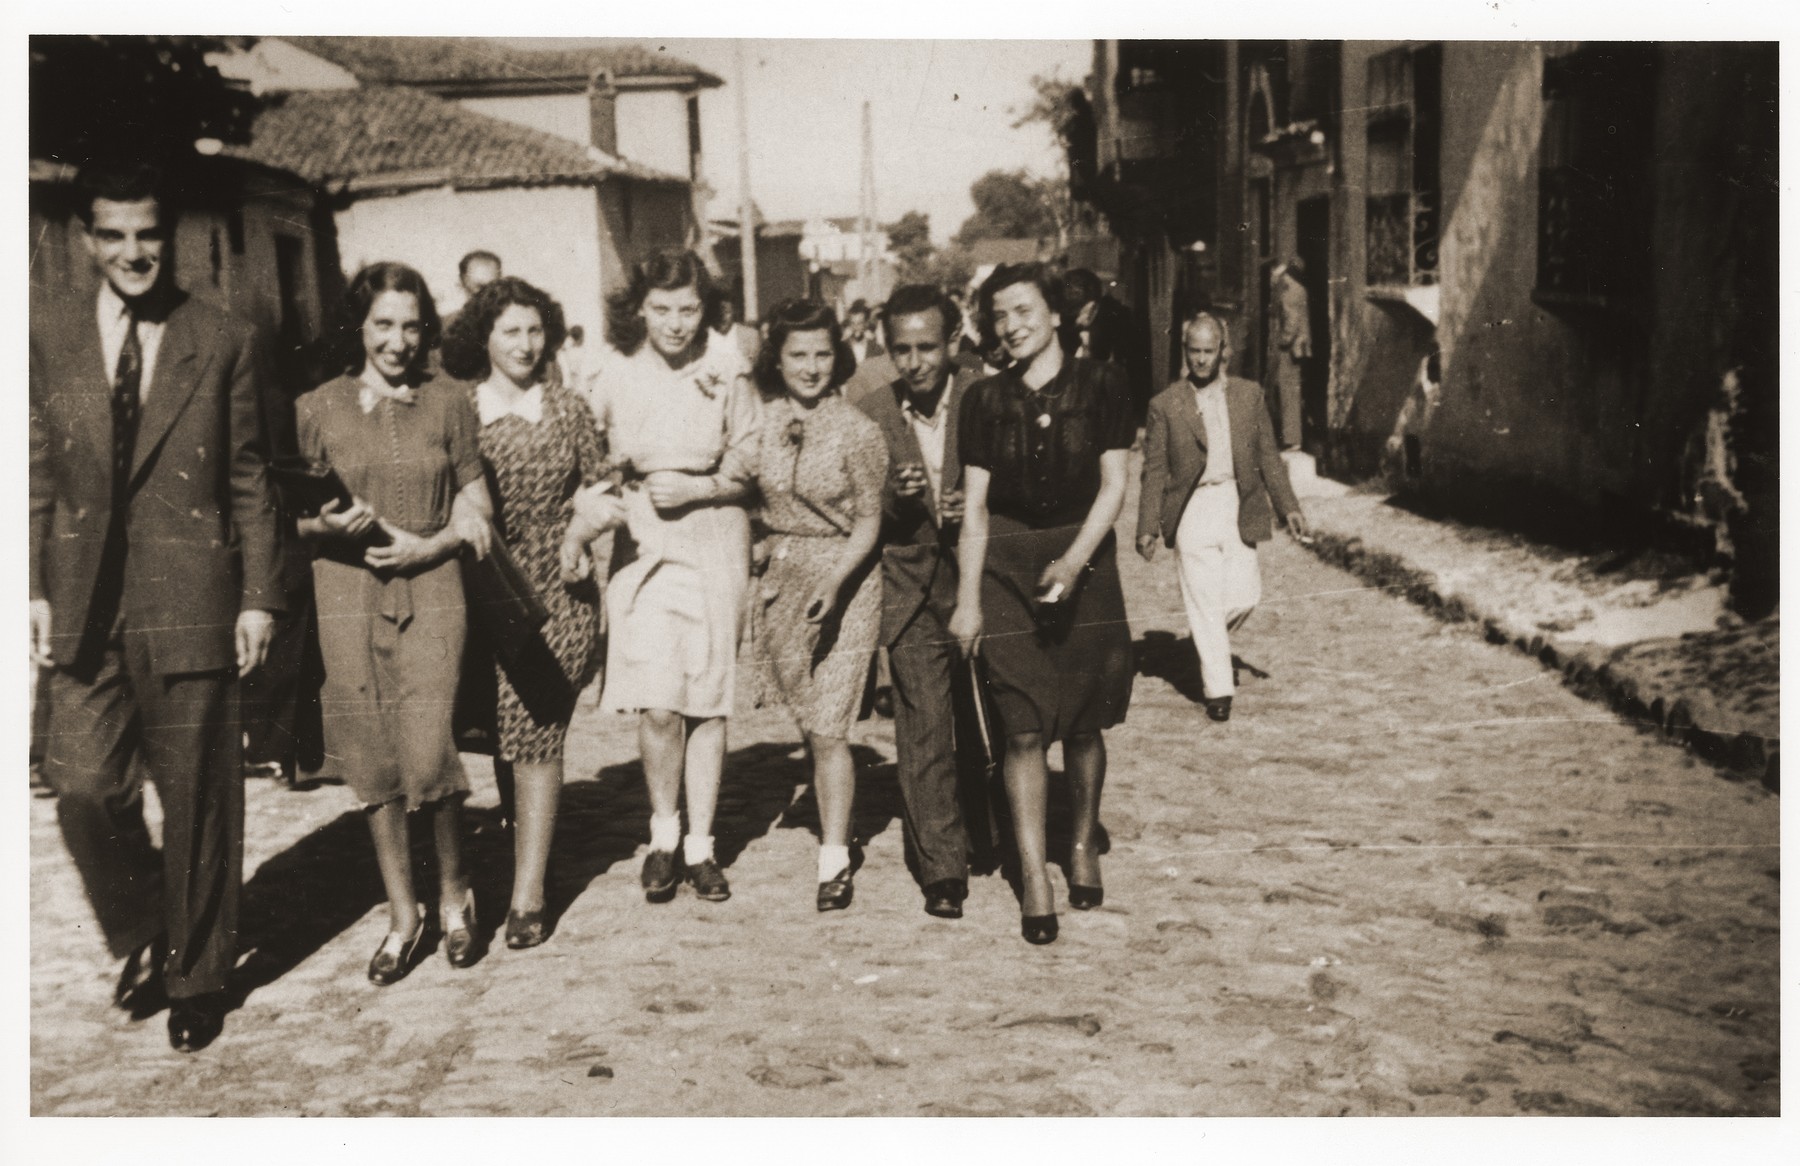 Family and friends walk down Tabaneh Street in the Jewish quarter of Monastir, just  after a wedding (synagogue pictured in the background on the left).

Among those pictured are (left to right) Leon Franco (a cousin of Rachel), Rachel (nee Nahmias) Kornberg, [first name unknown] Pardo, [first name unknown] Shami, Elinor [last name unknown], Moise [last name unknown], and [an unidentified woman].